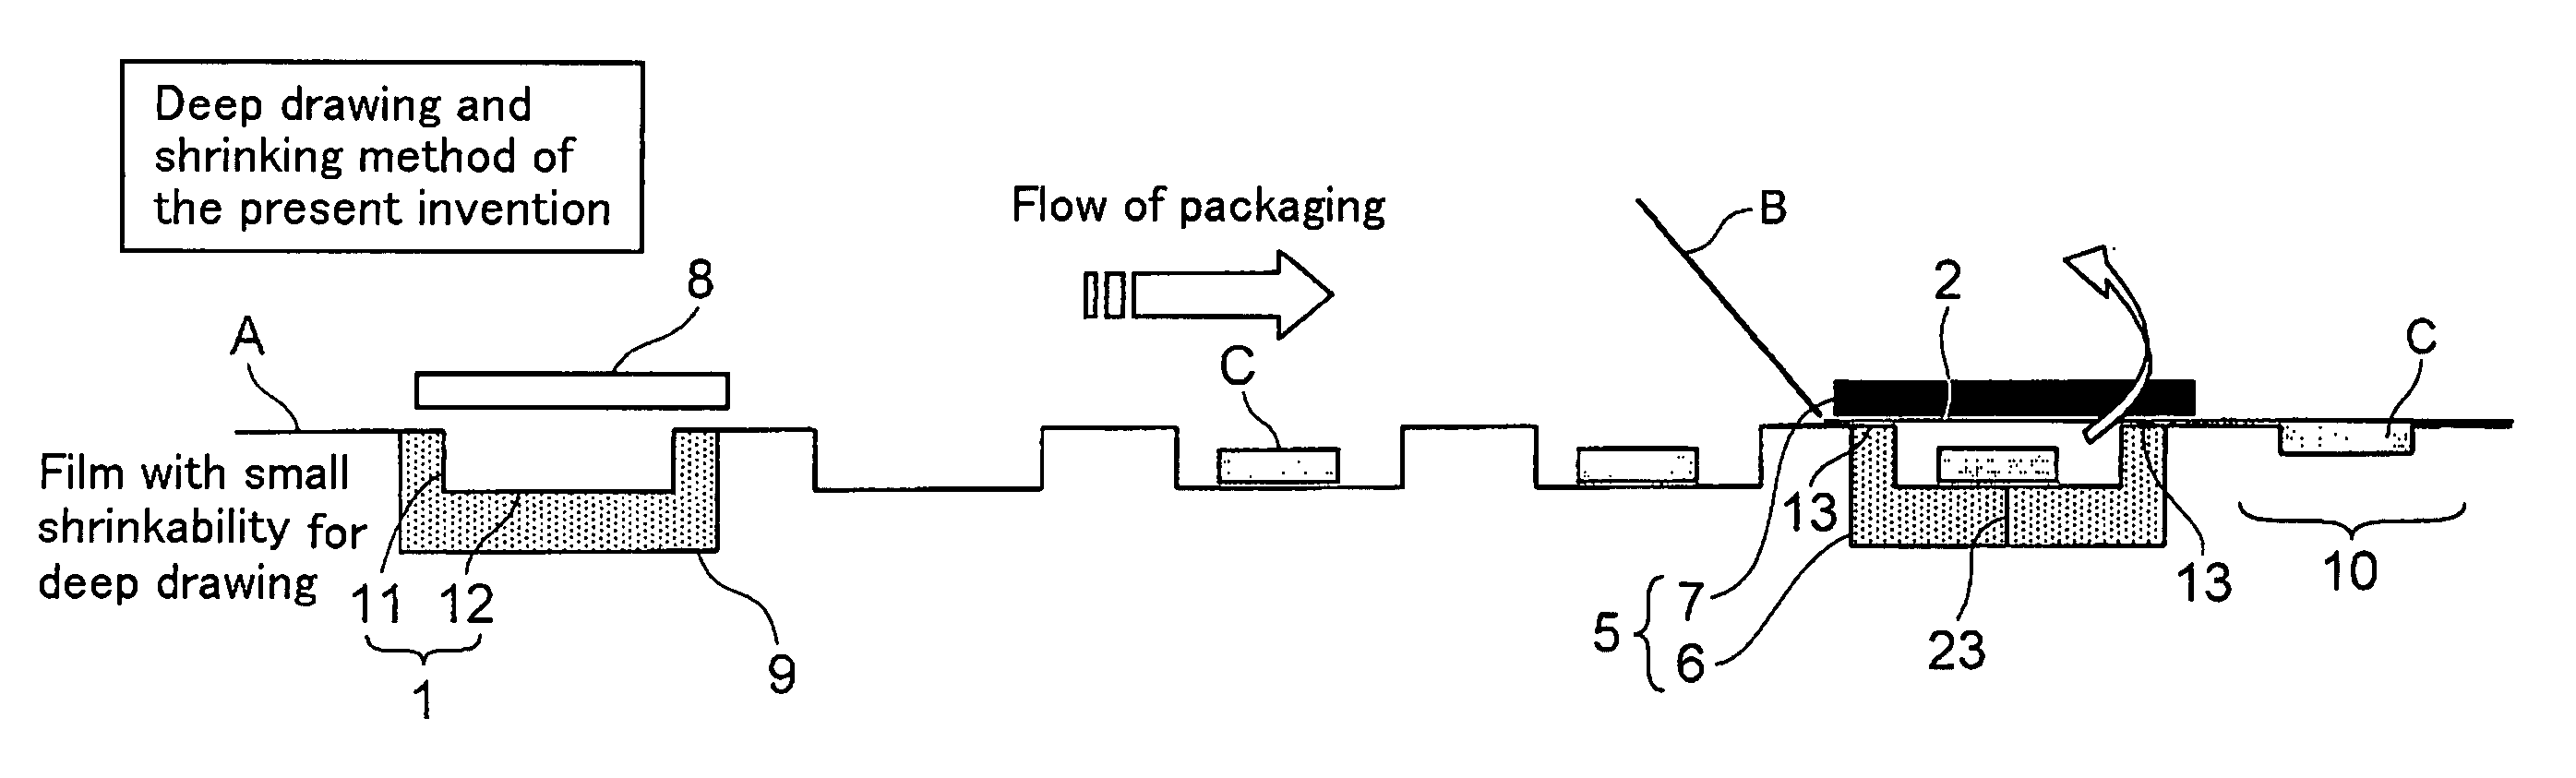 Deep draw packing method and film with small shrinkability for deep draw packing